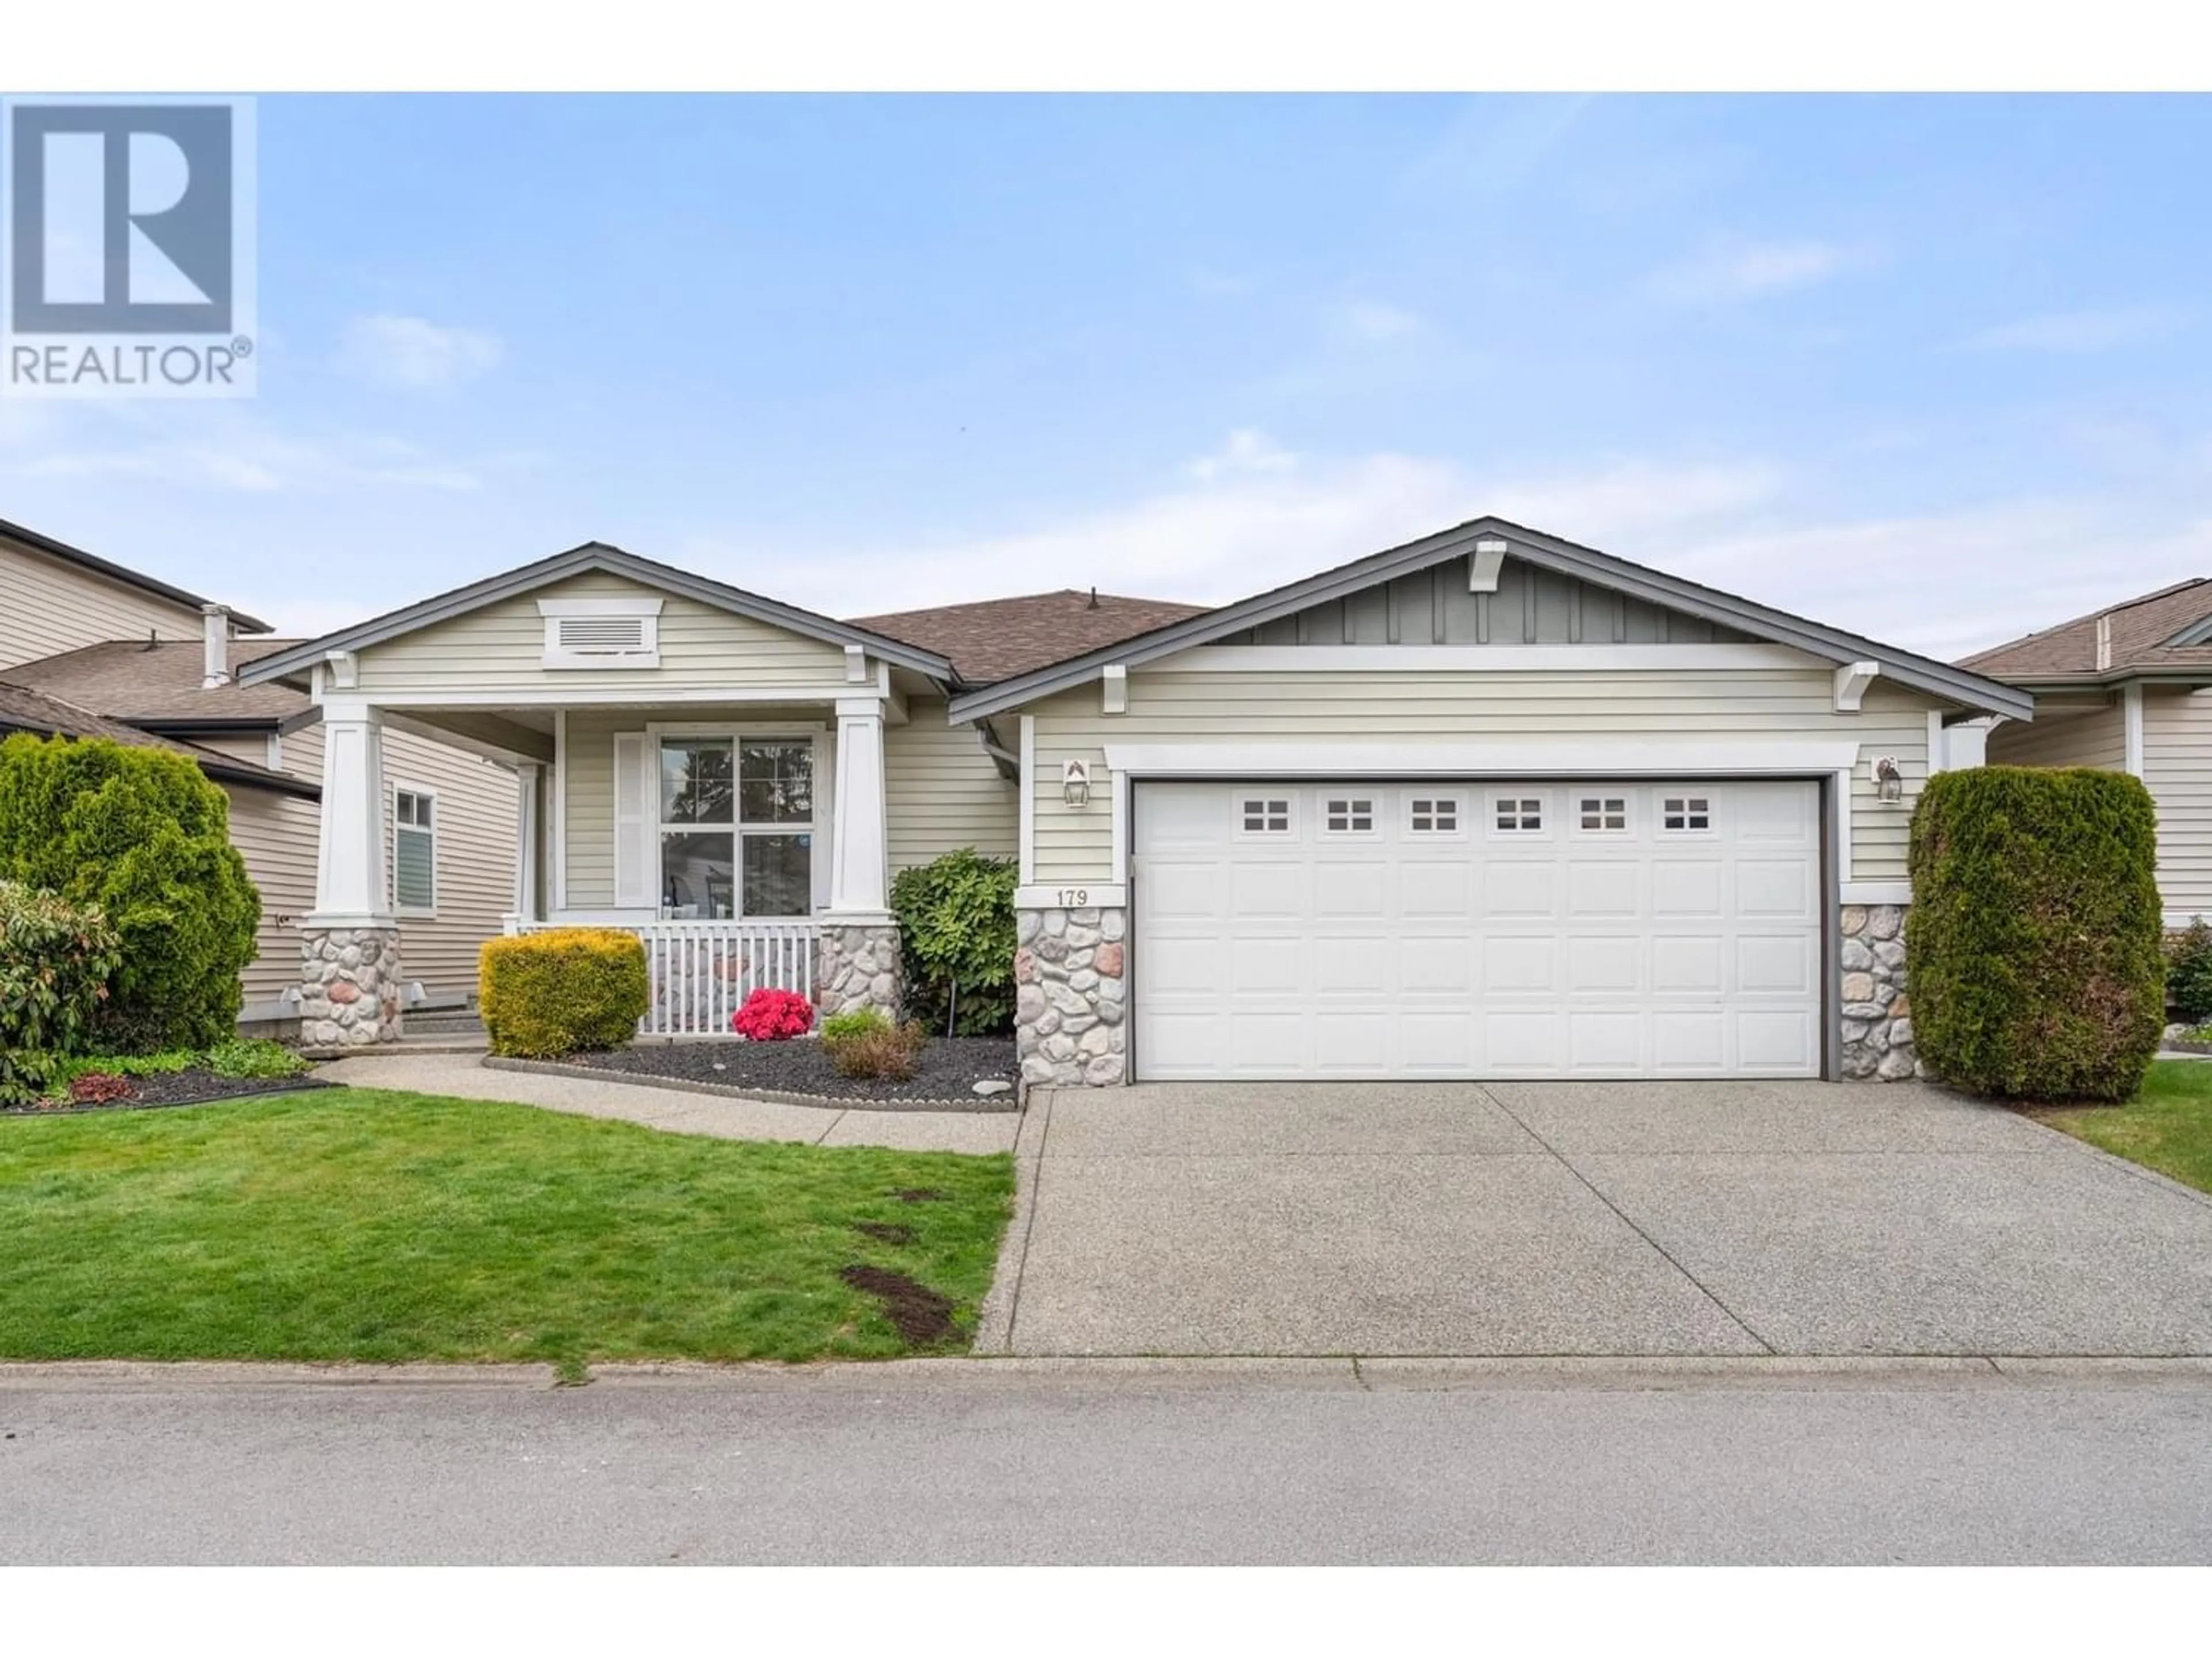 Frontside or backside of a home for 179 19639 MEADOW GARDENS WAY, Pitt Meadows British Columbia V3Y2T5